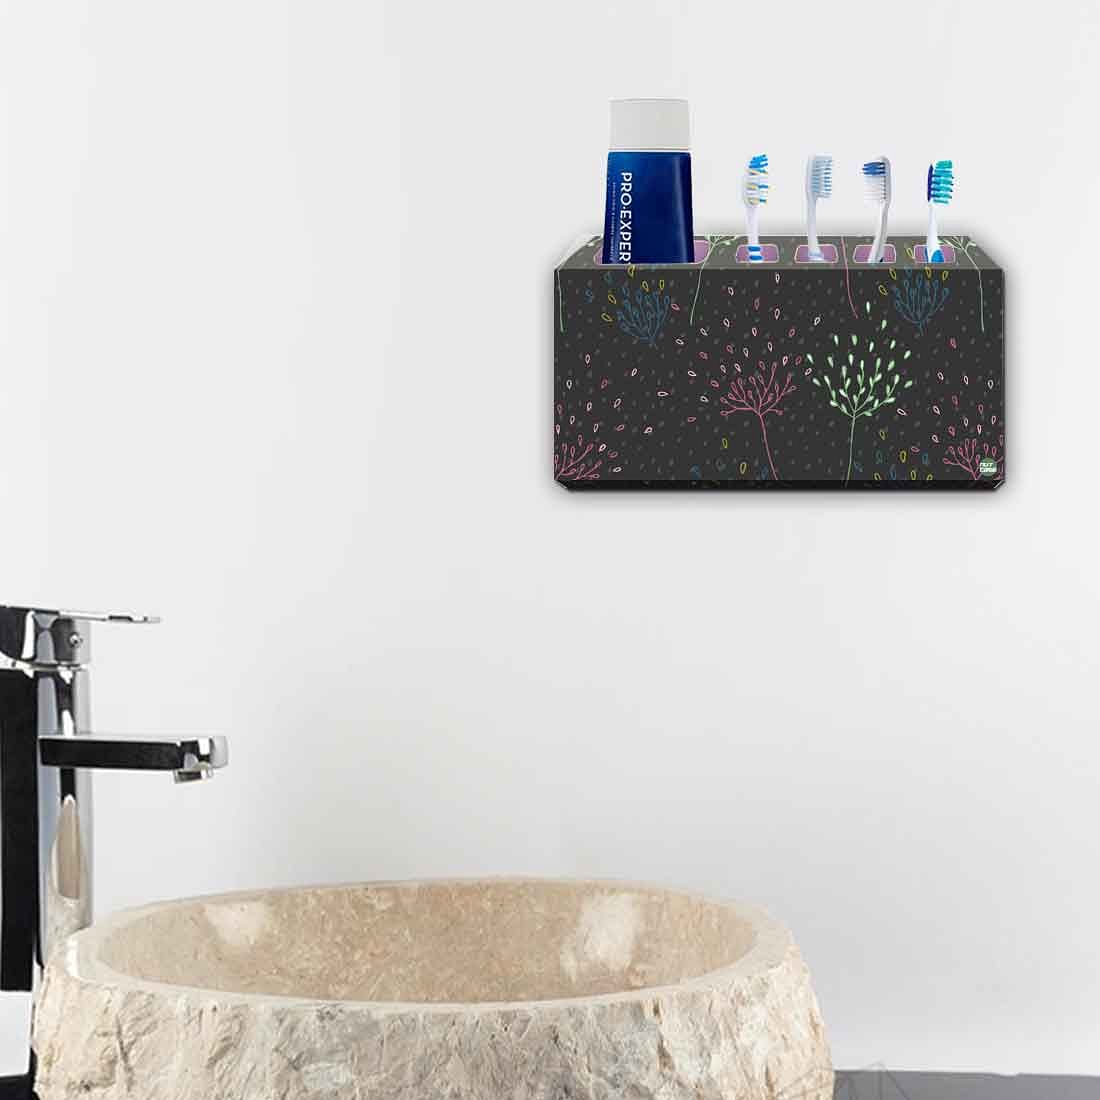 Toothbrush Holder Wall Mounted -Flower Petals Nutcase